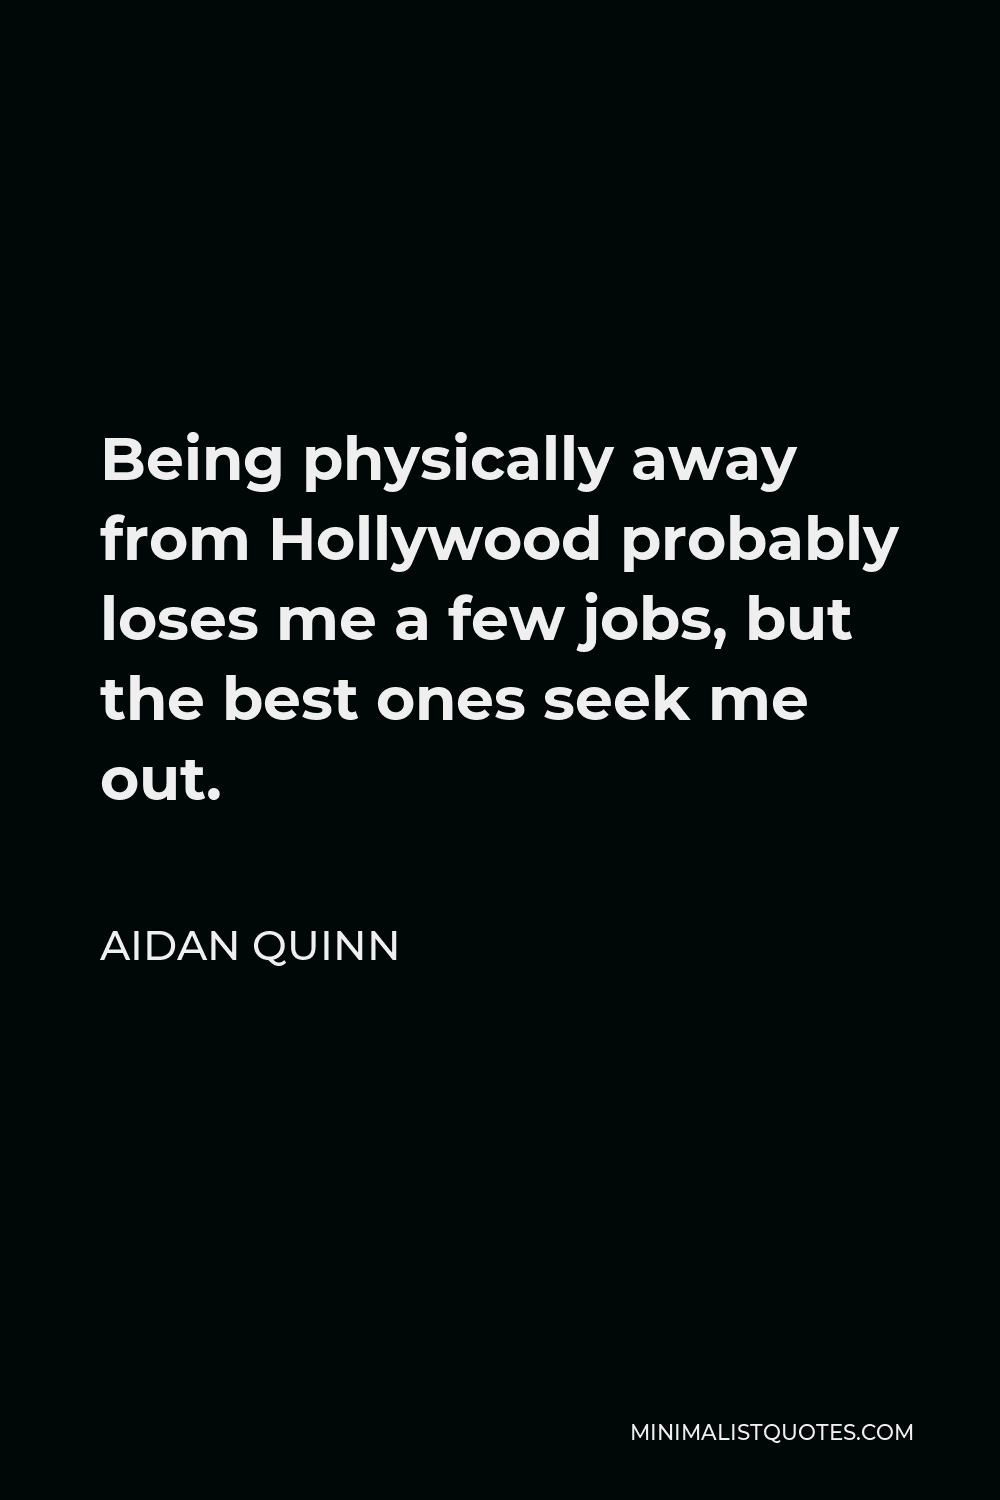 Aidan Quinn Quote - Being physically away from Hollywood probably loses me a few jobs, but the best ones seek me out.